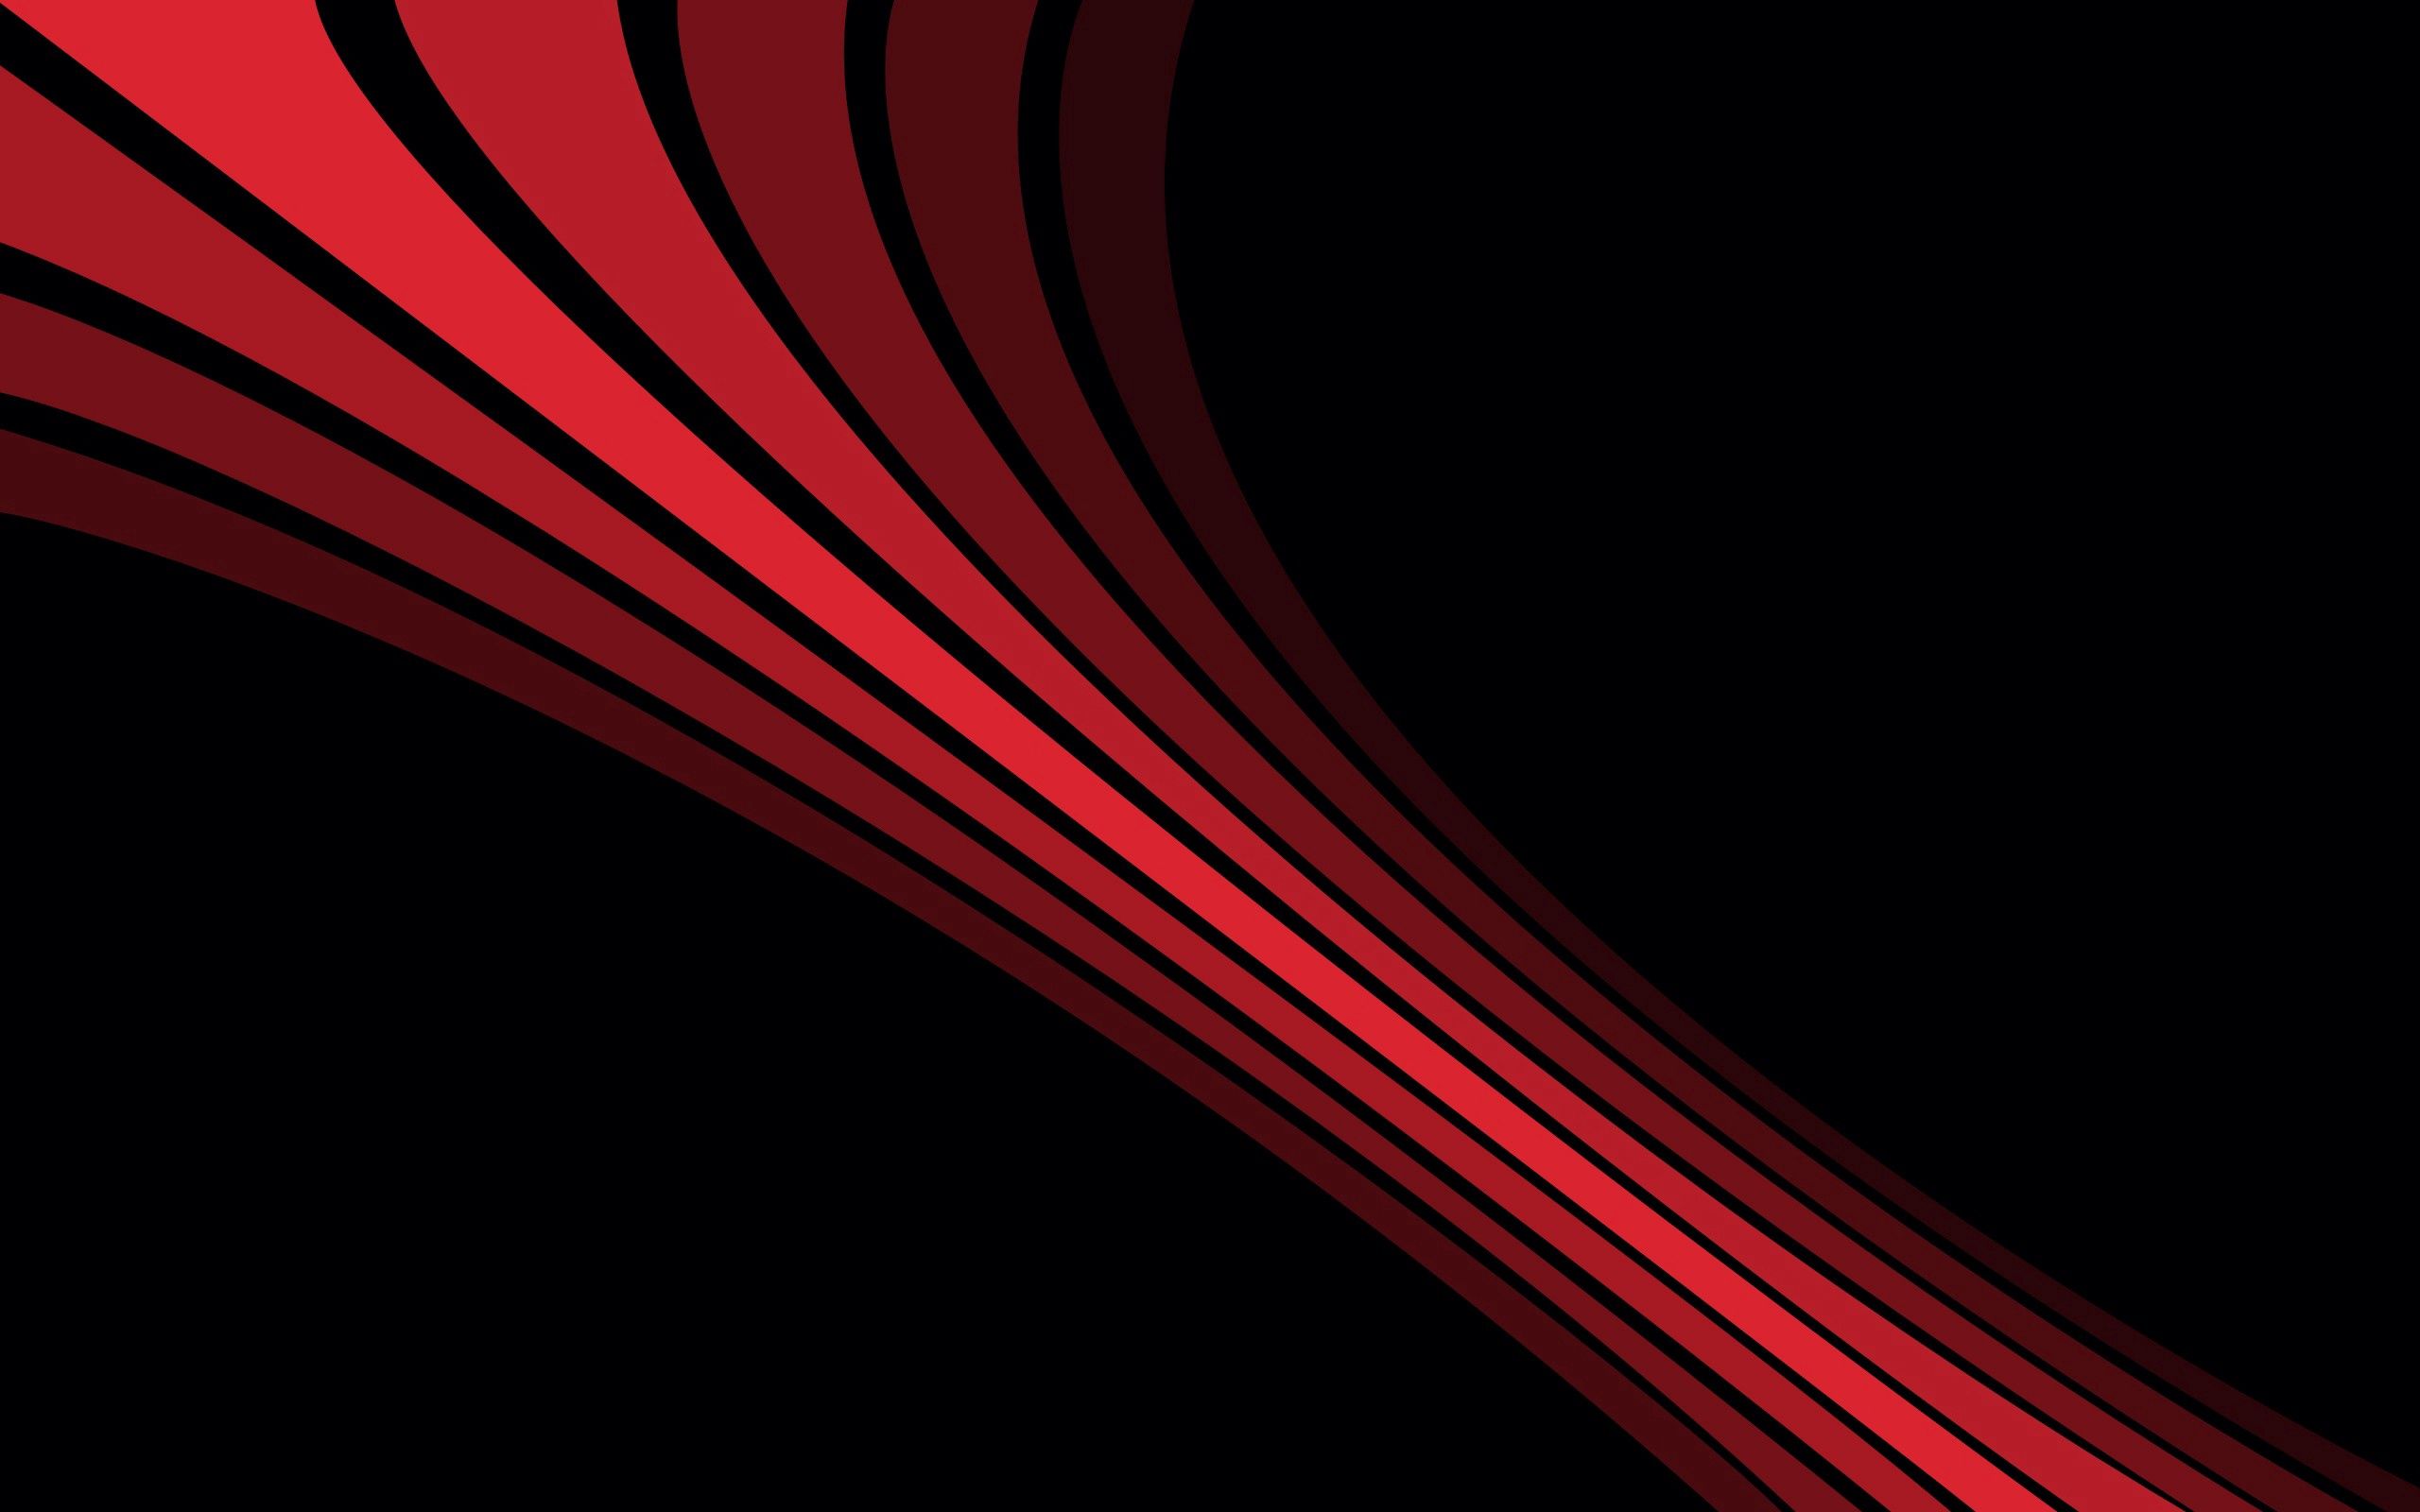 streaks, form, black, lines, abstract, red, shadow, stripes